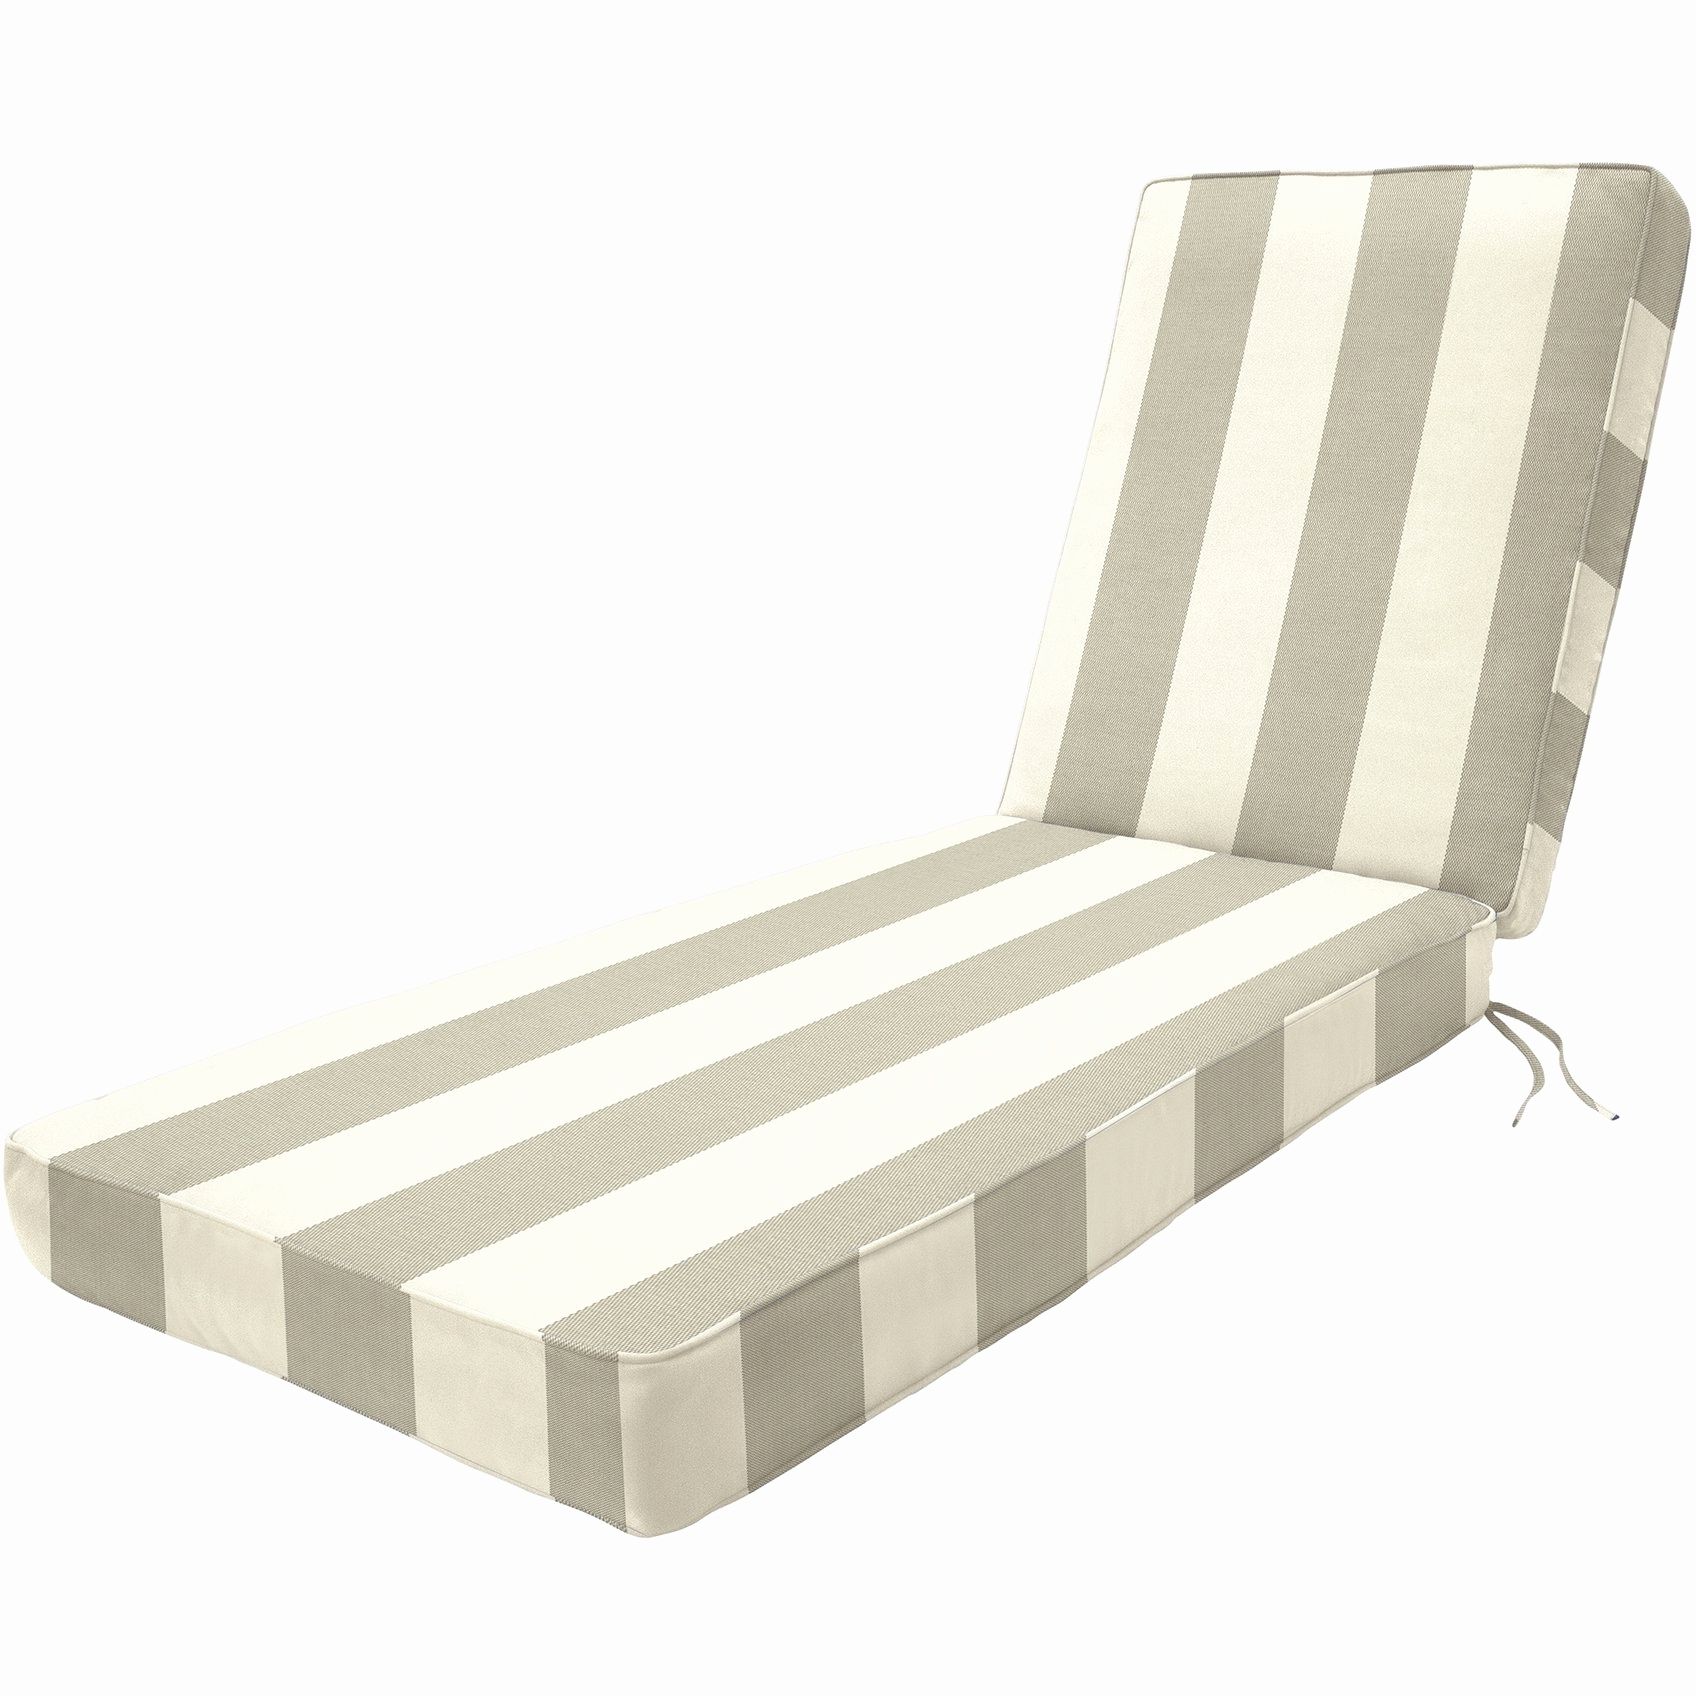 Famous Outdoor : Lowes Chaise Lounge Lounge Chair Target Plastic Lounge Regarding Chaise Lounge Chairs At Target (View 9 of 15)